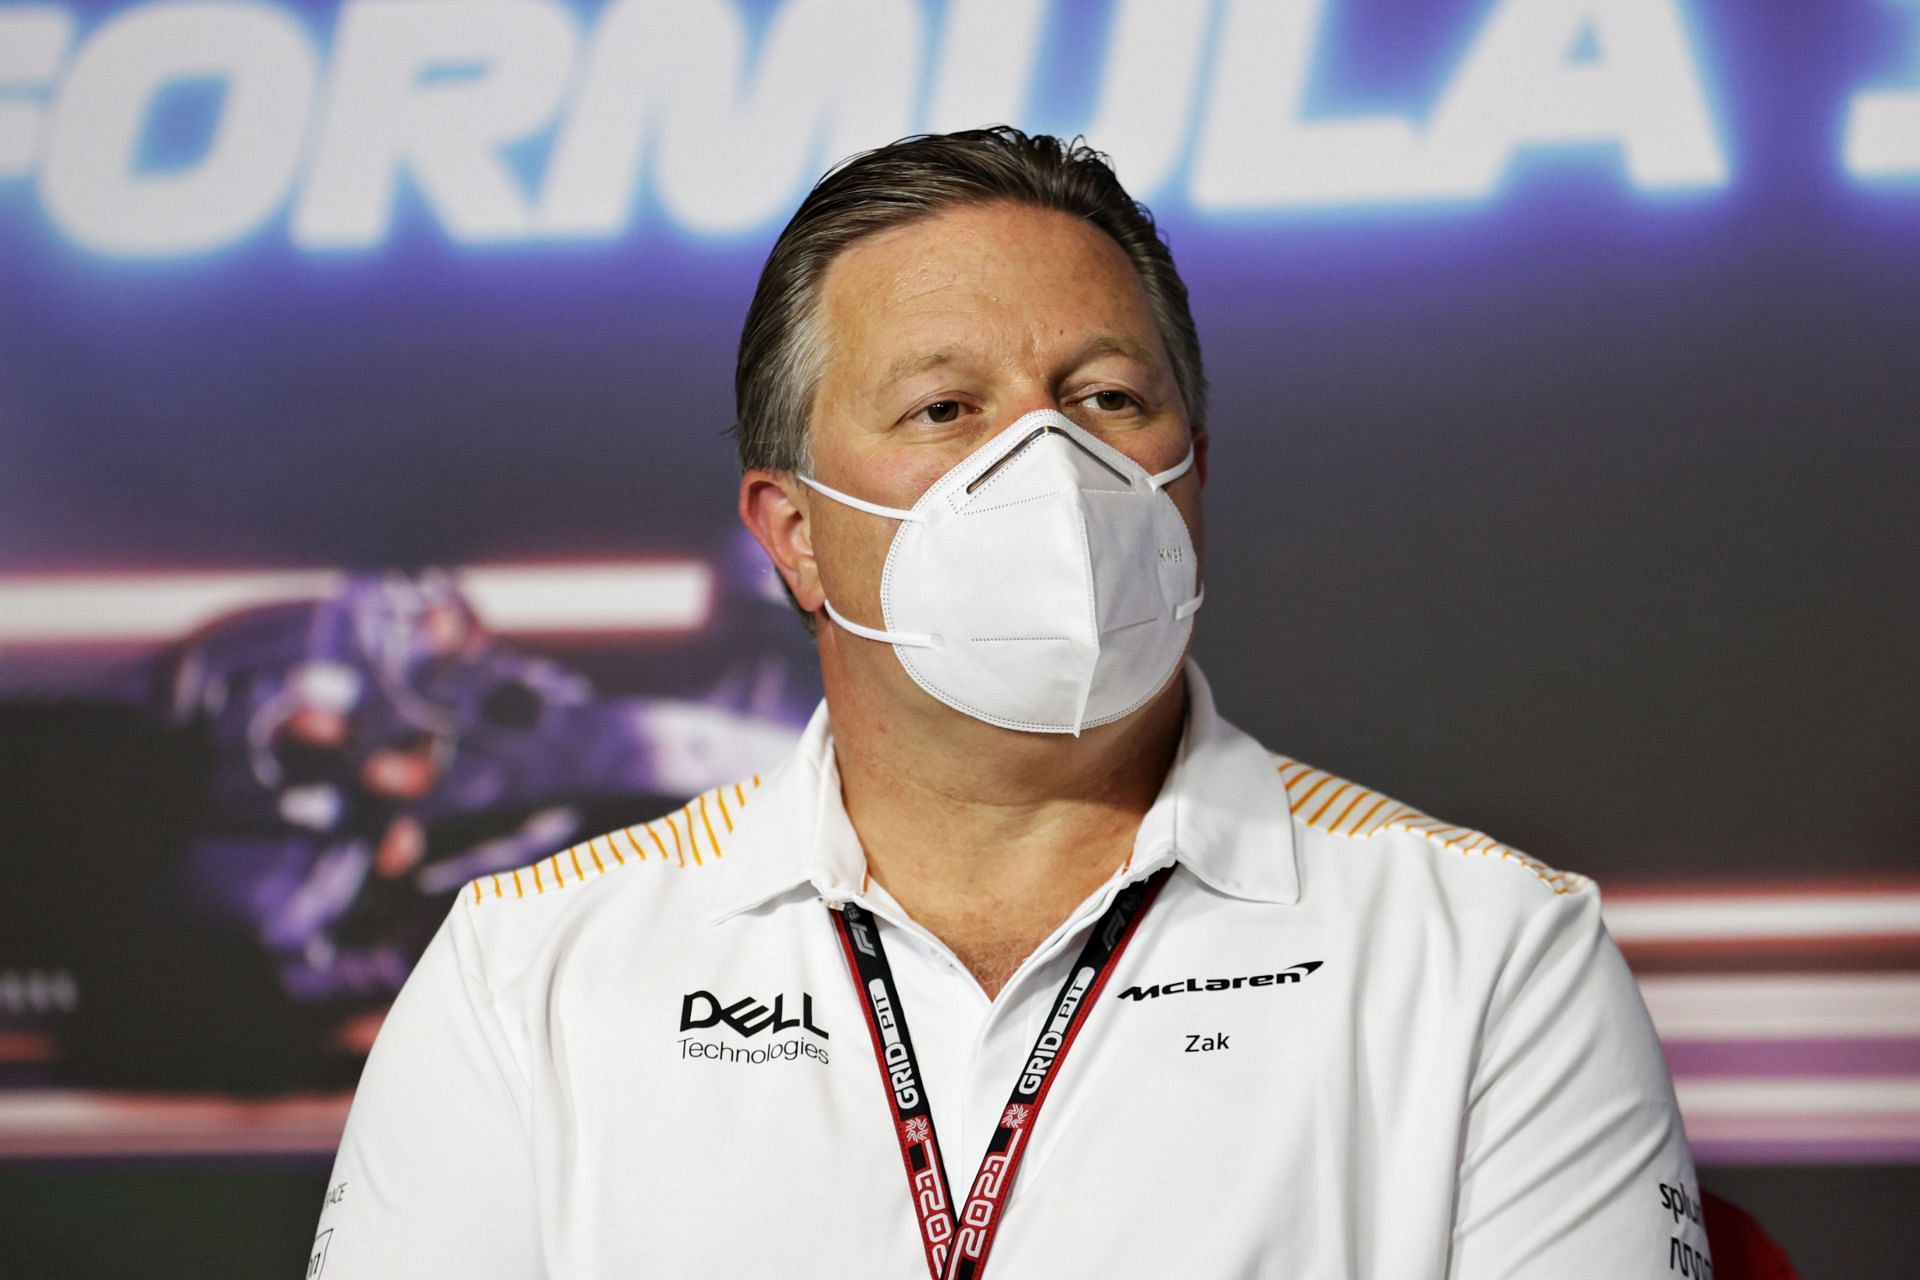 McLaren CEO Zak Brown is unhappy with F1 rivals for their lobbying of Michael Masi during the 2021 season.